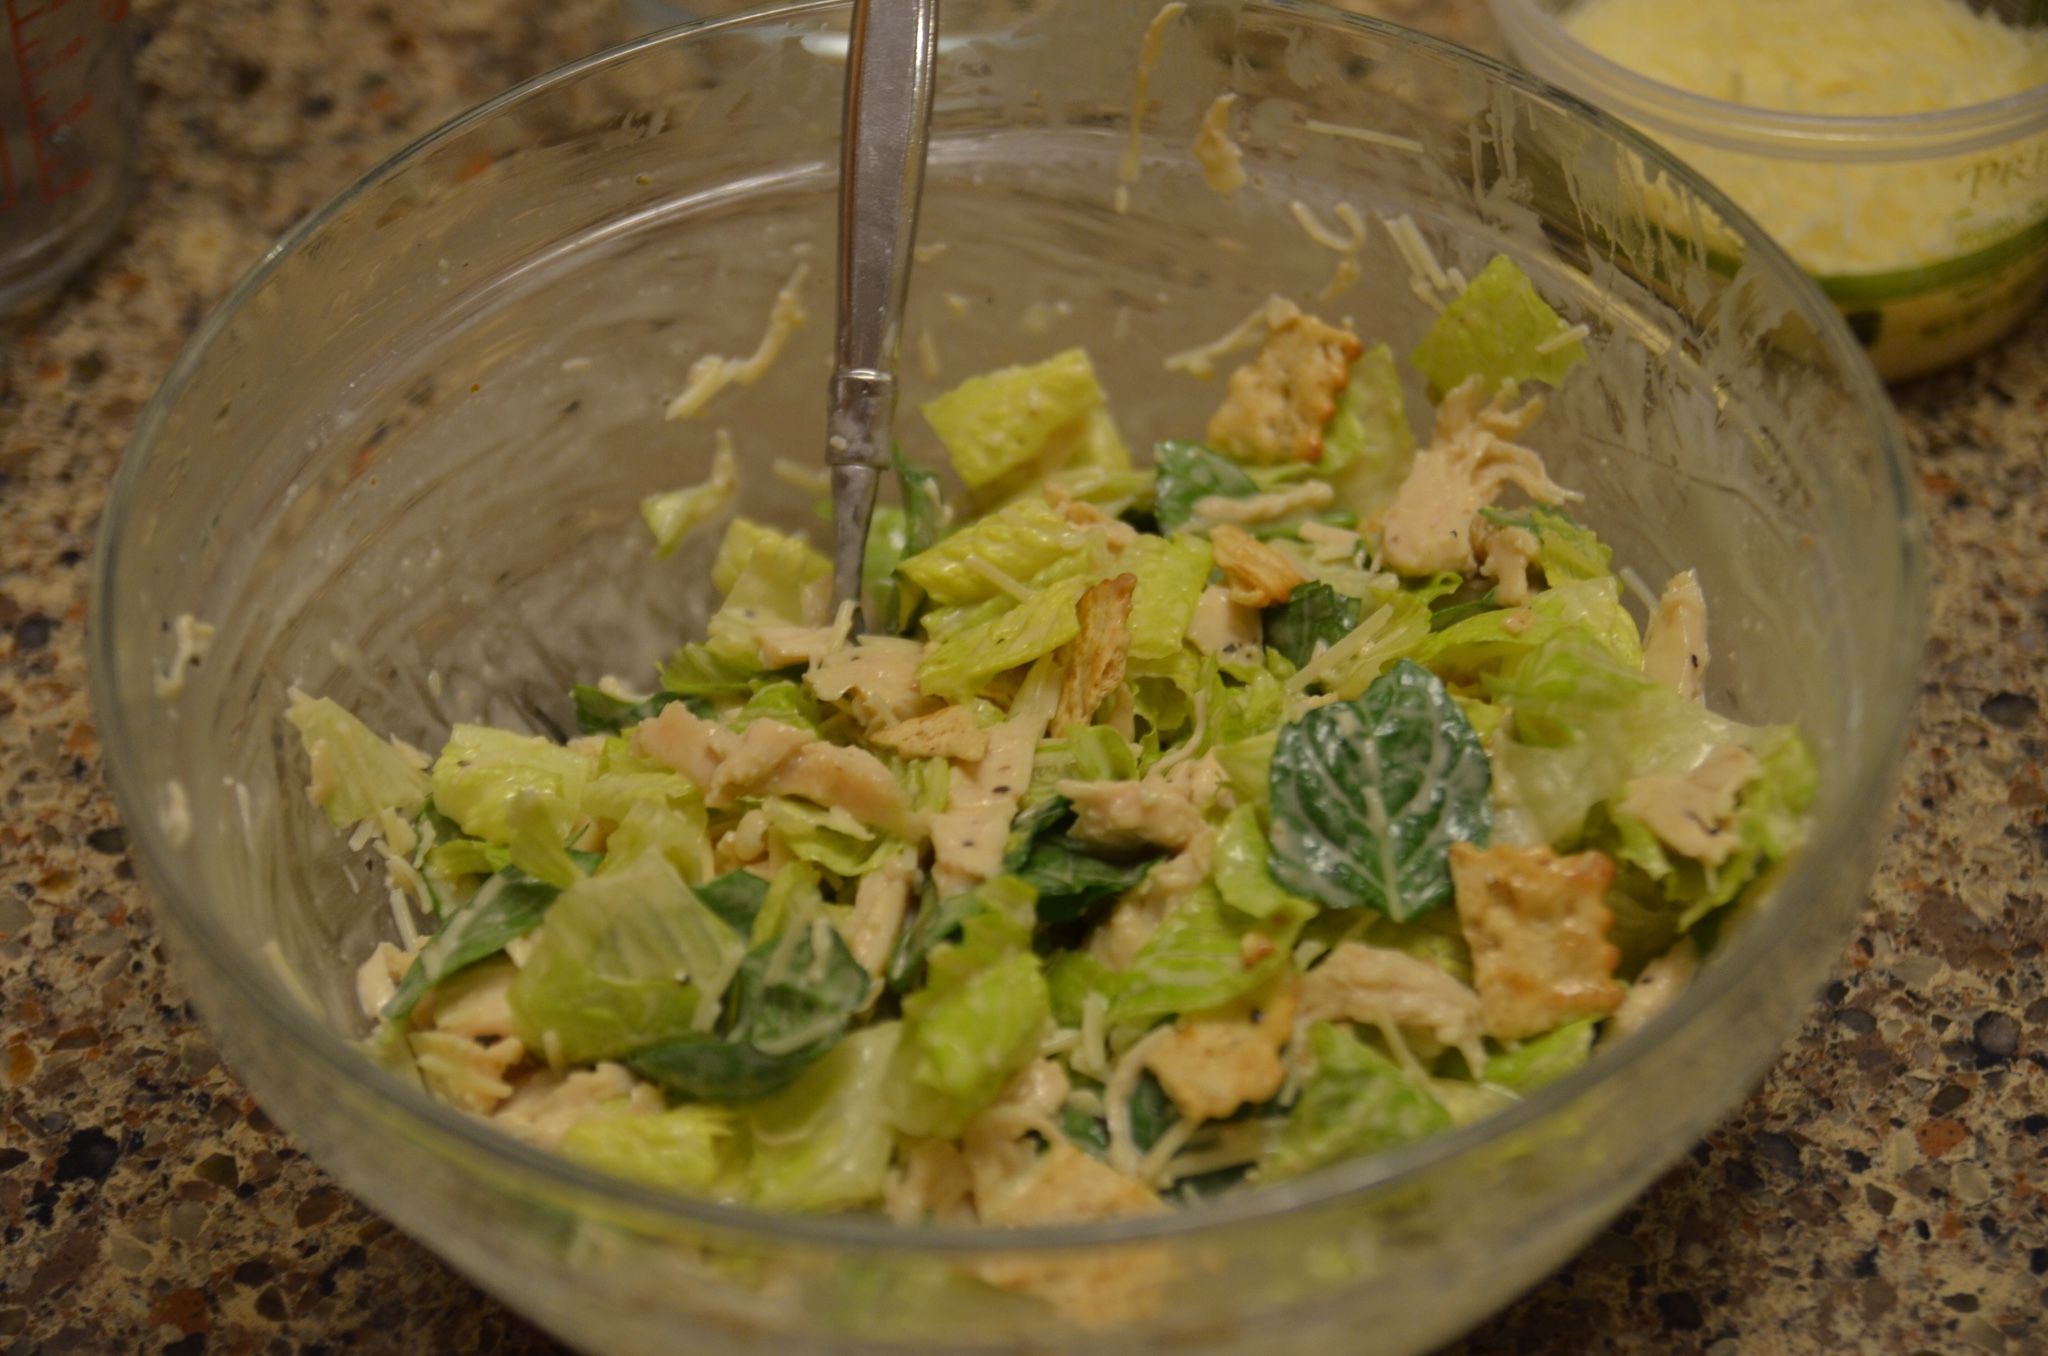 mixing the salad filling for chicken caesar wraps